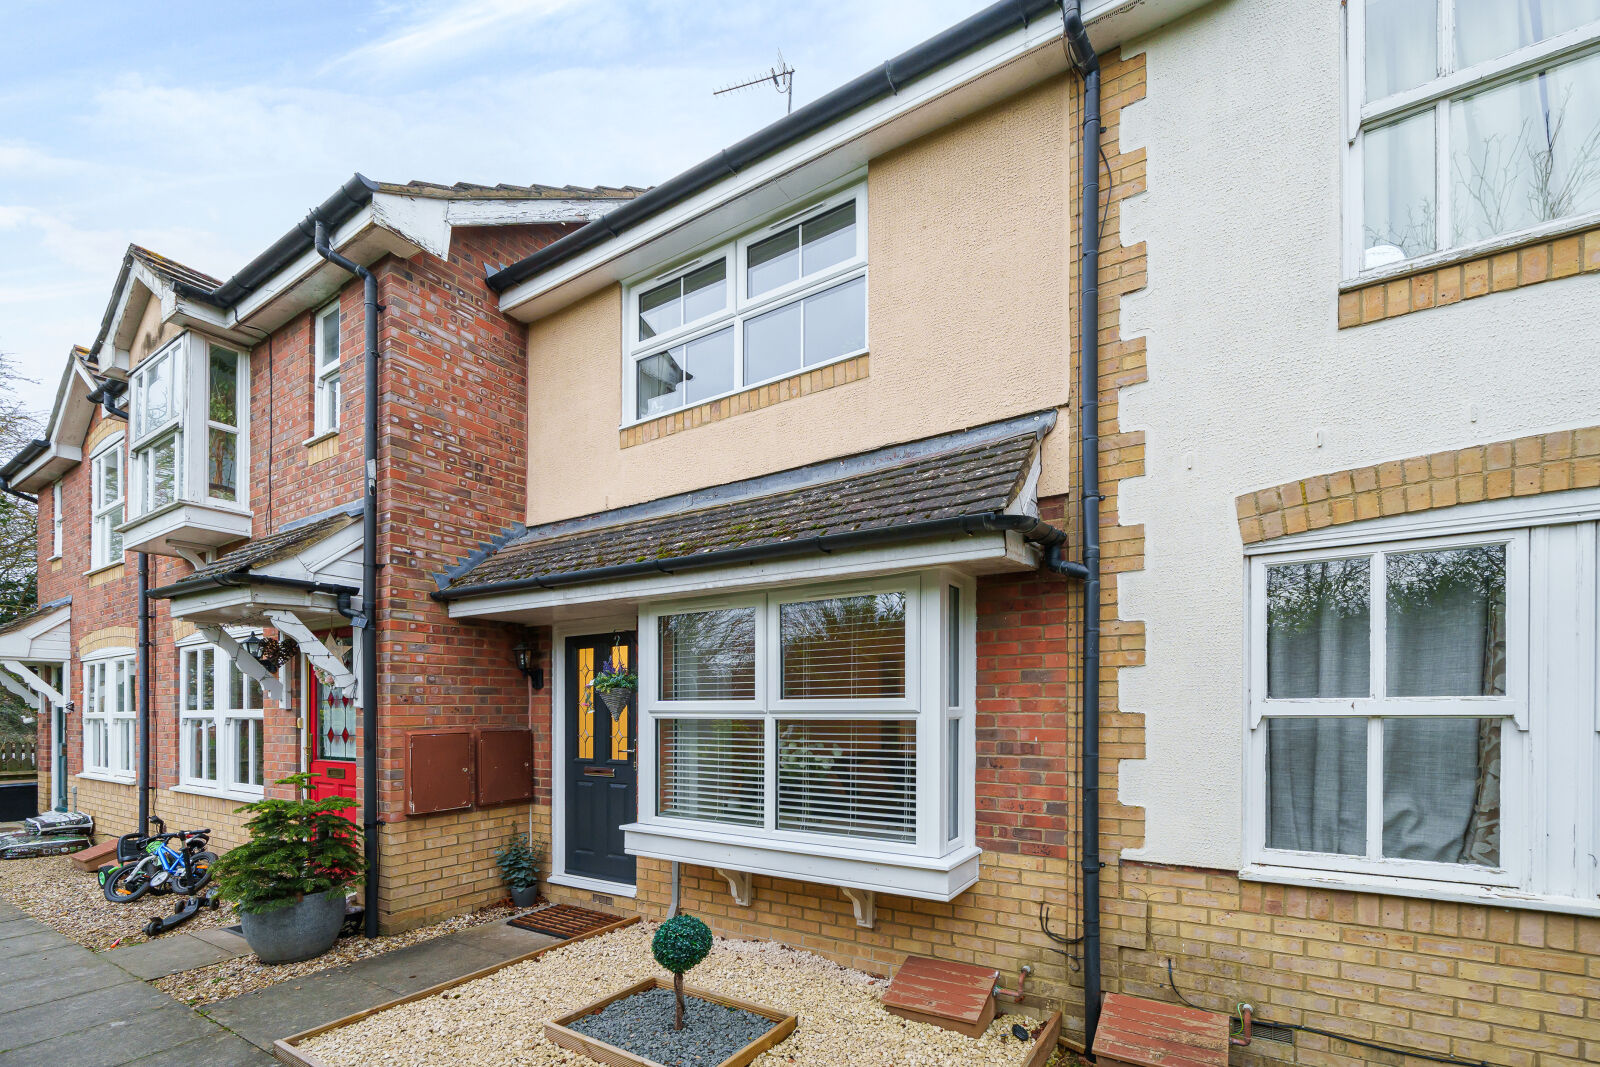 2 bedroom mid terraced house for sale Finham Brook, Didcot, OX11, main image